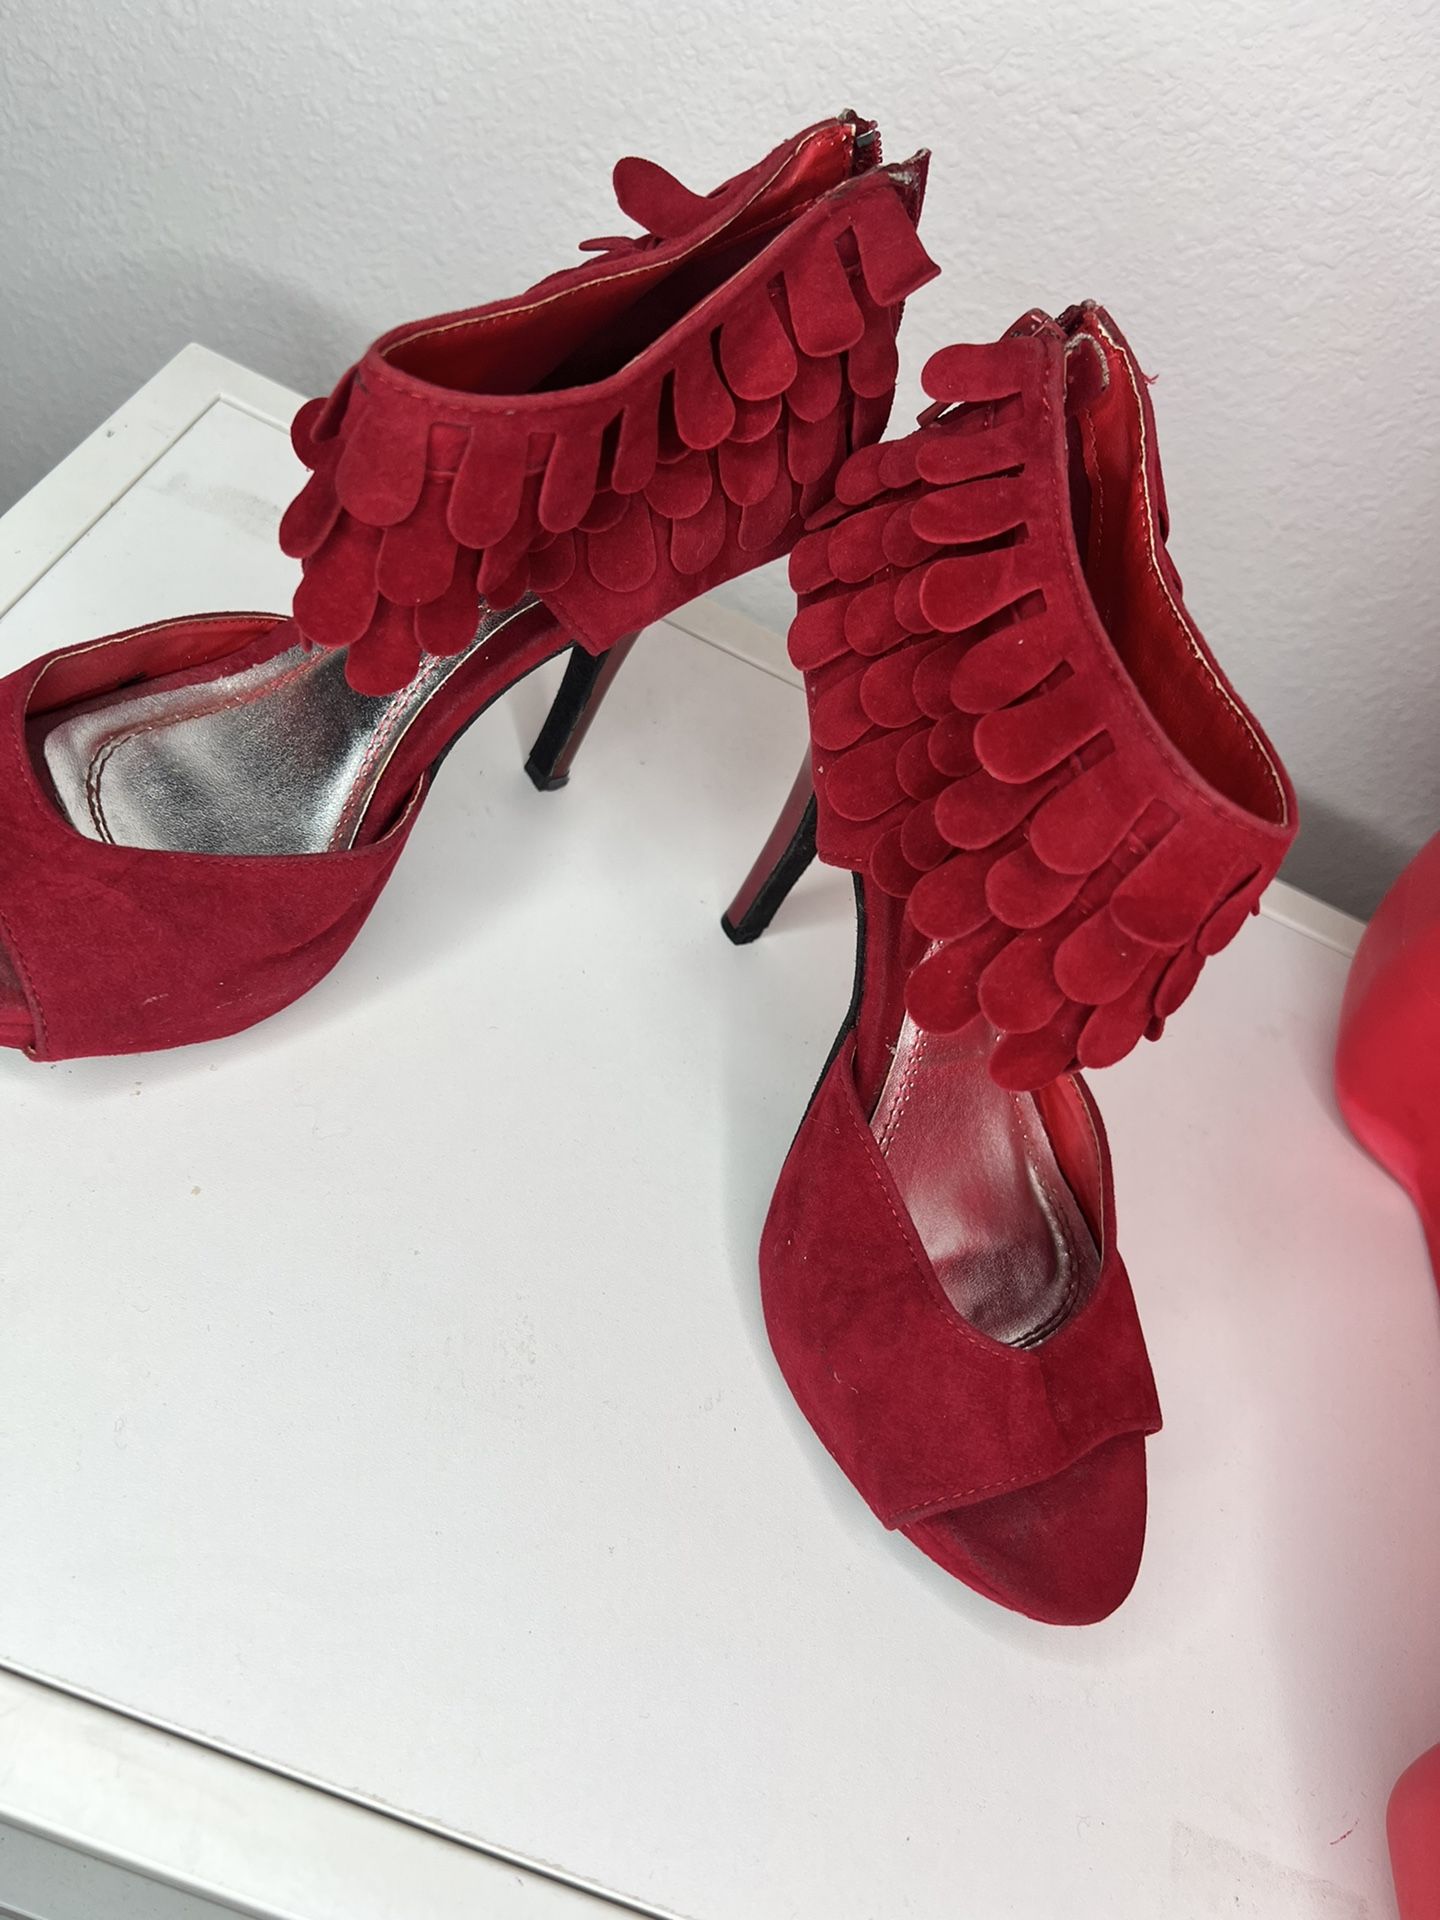 Red Heels Size 8